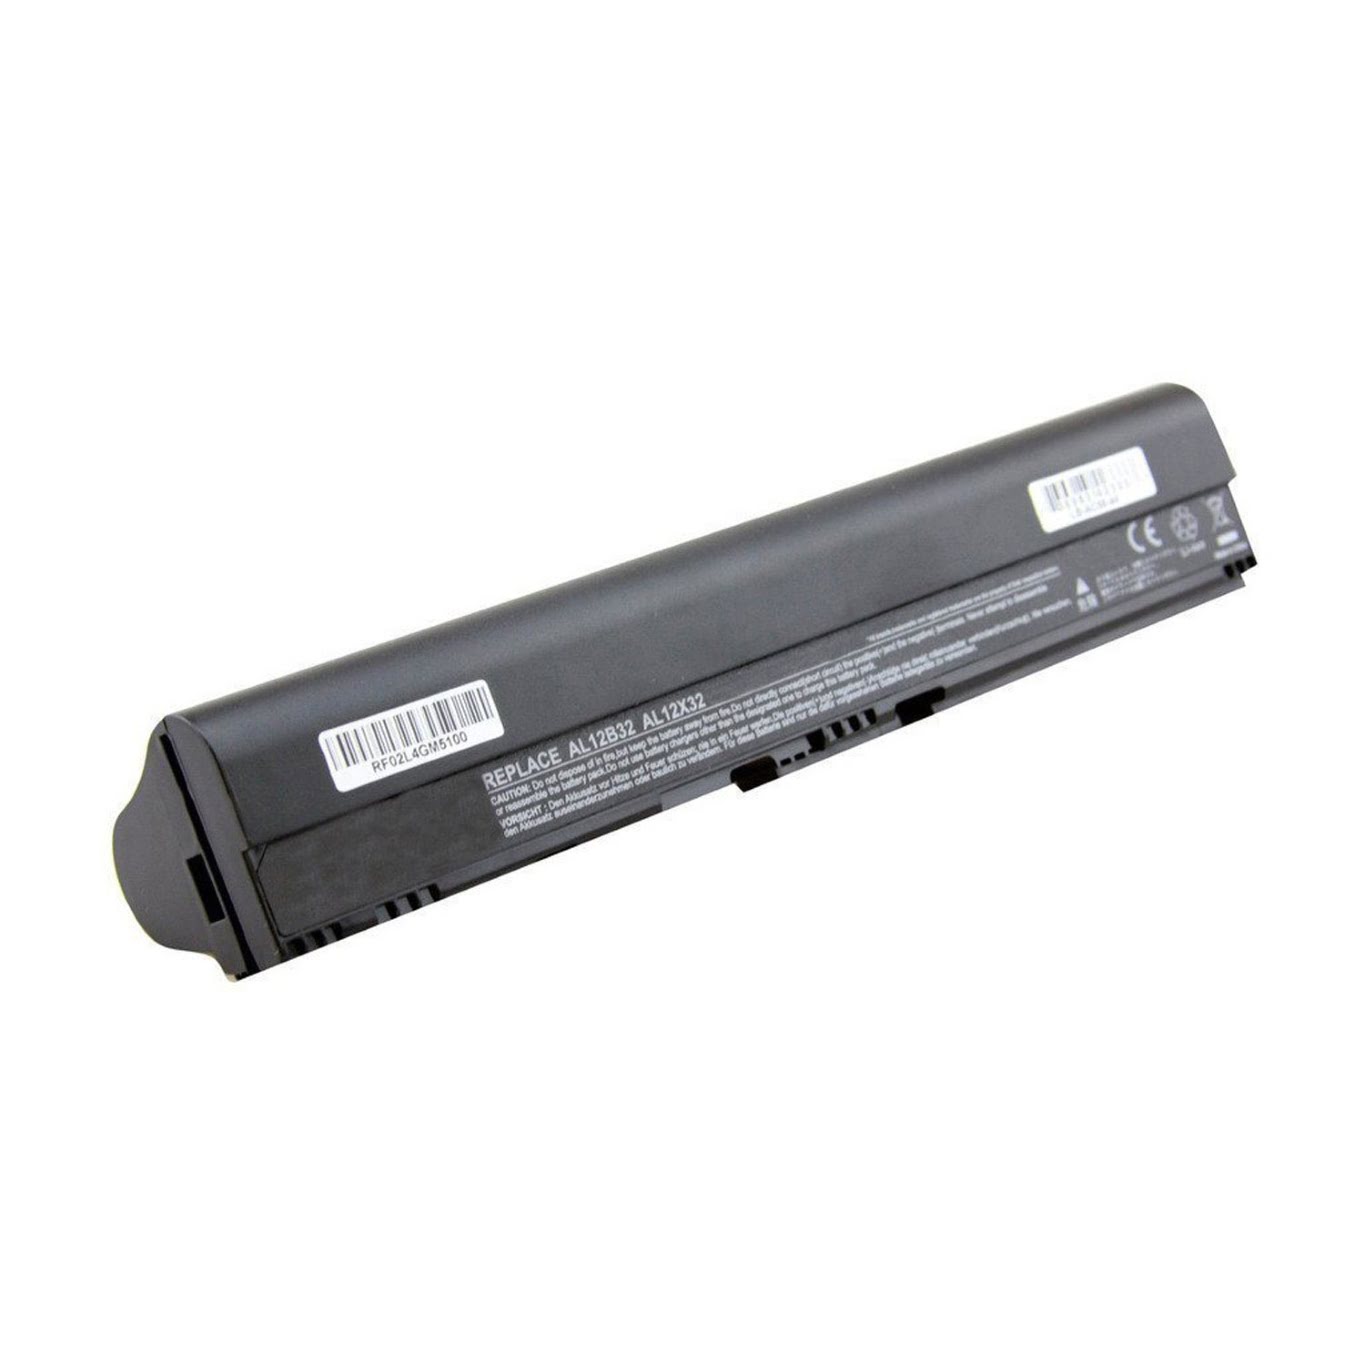 AL12A31, AL12B31 replacement Laptop Battery for Acer Aspire One 725 Series, Aspire One 756, 11.1V, 4400mAh, 6 cells